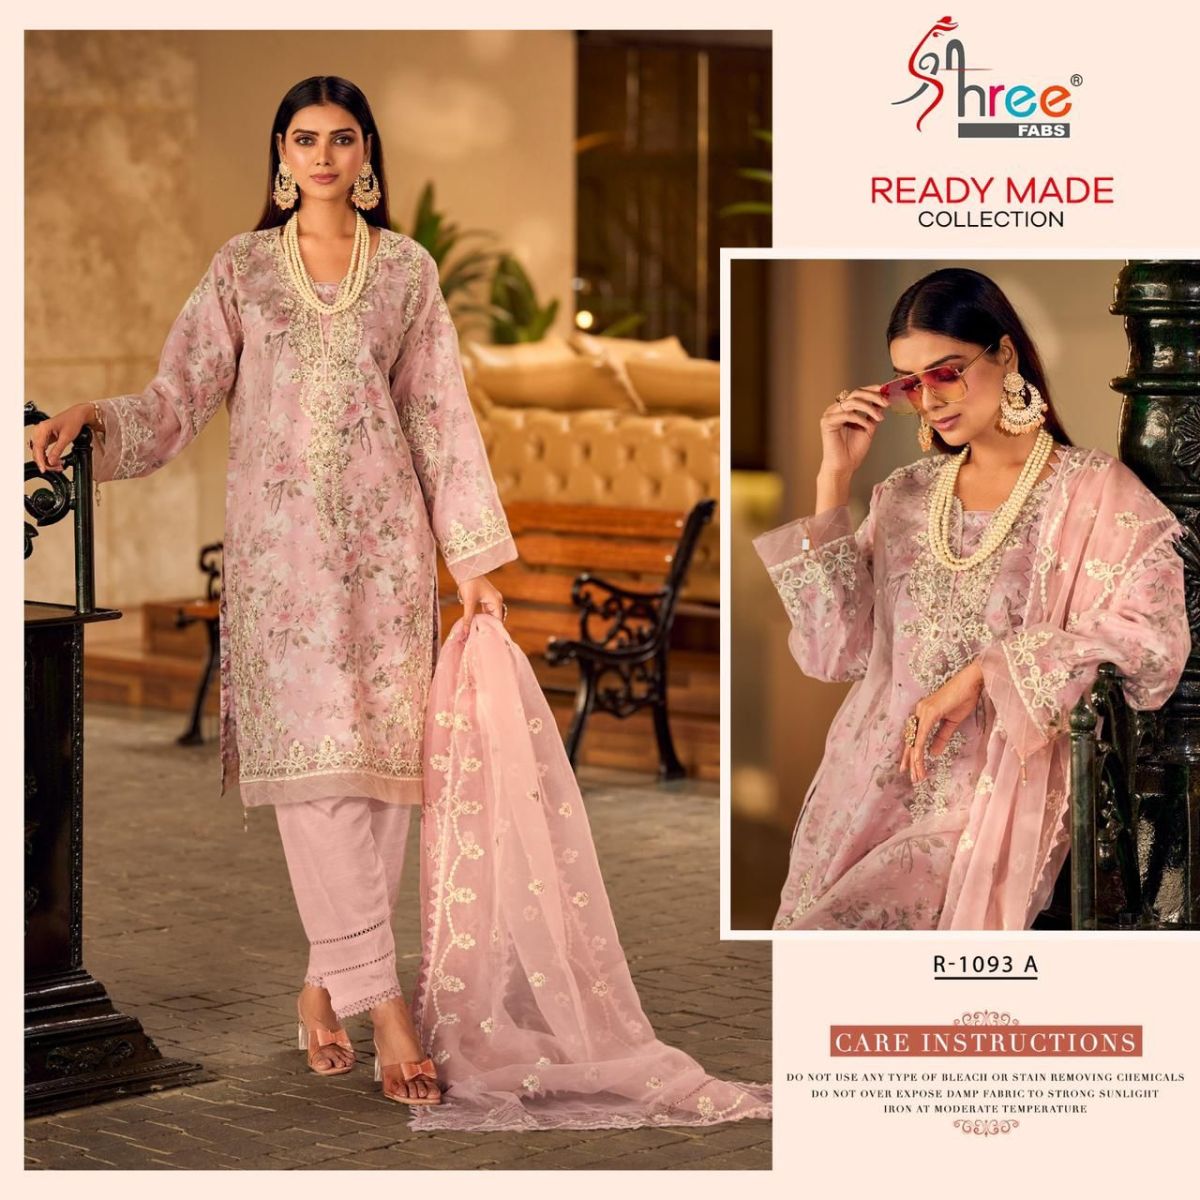 Shree Fabs Chevron Luxury Lawn Collection Vol 18 Cotton With Embroider